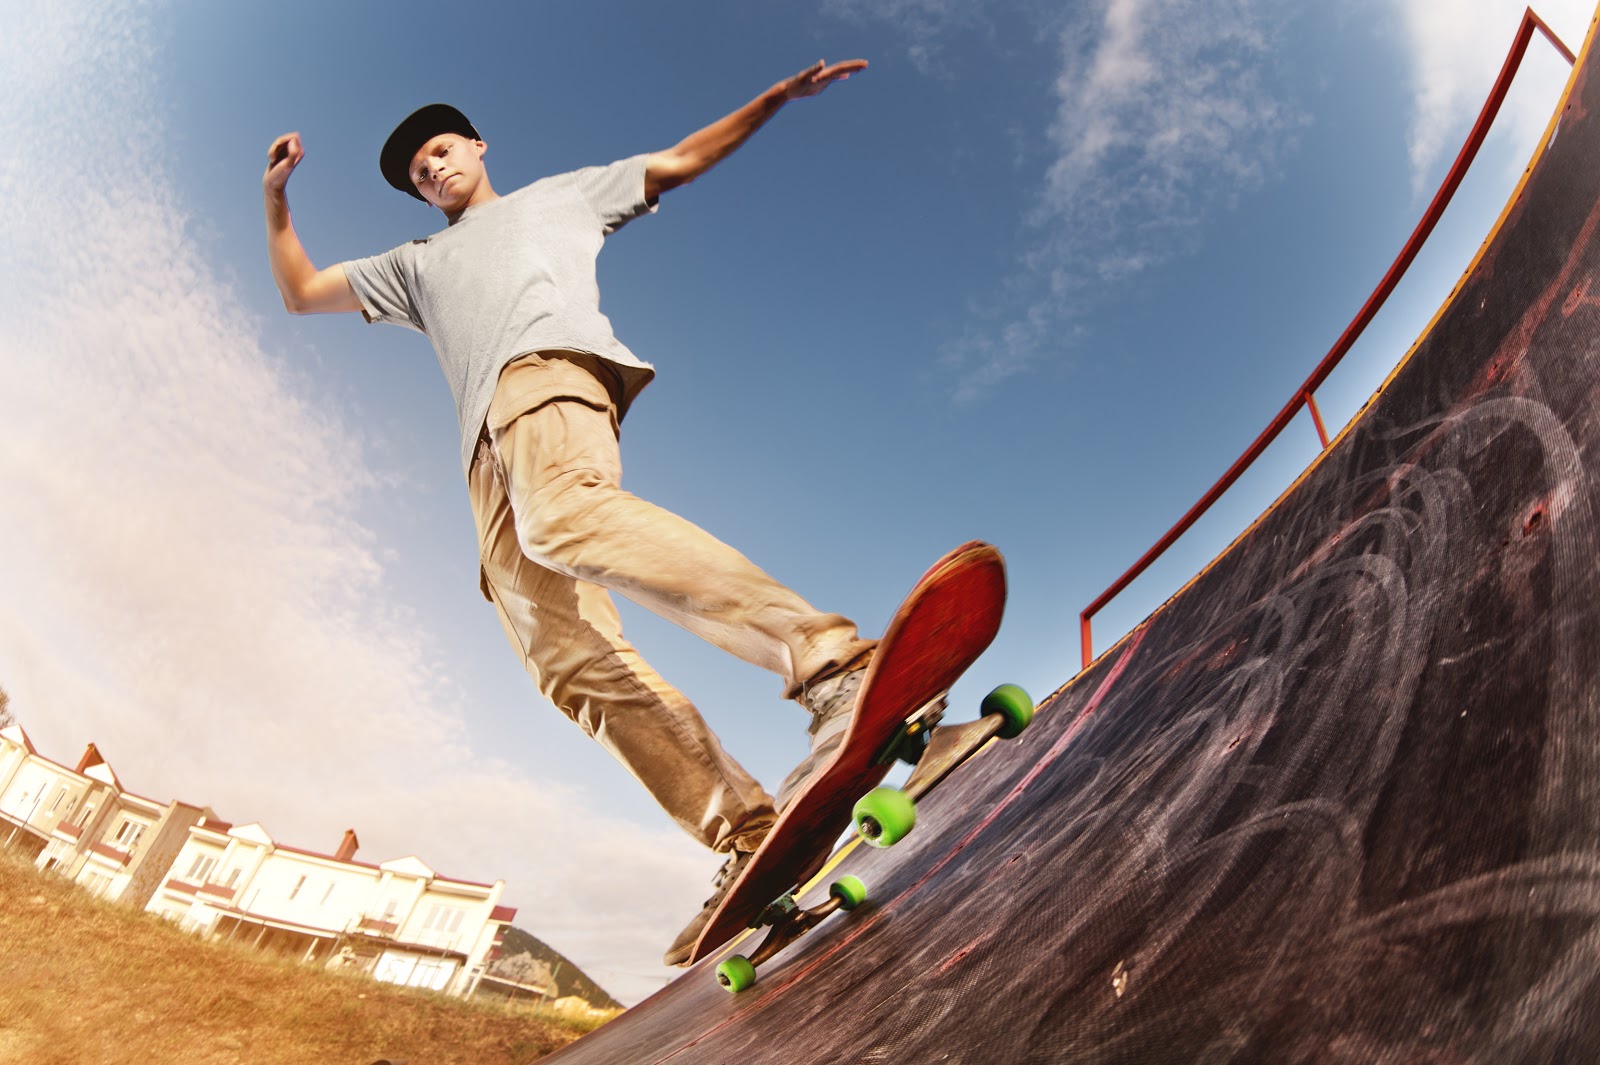 Teen skater hang up over a ramp on a skateboard in a skate park. Wide angle